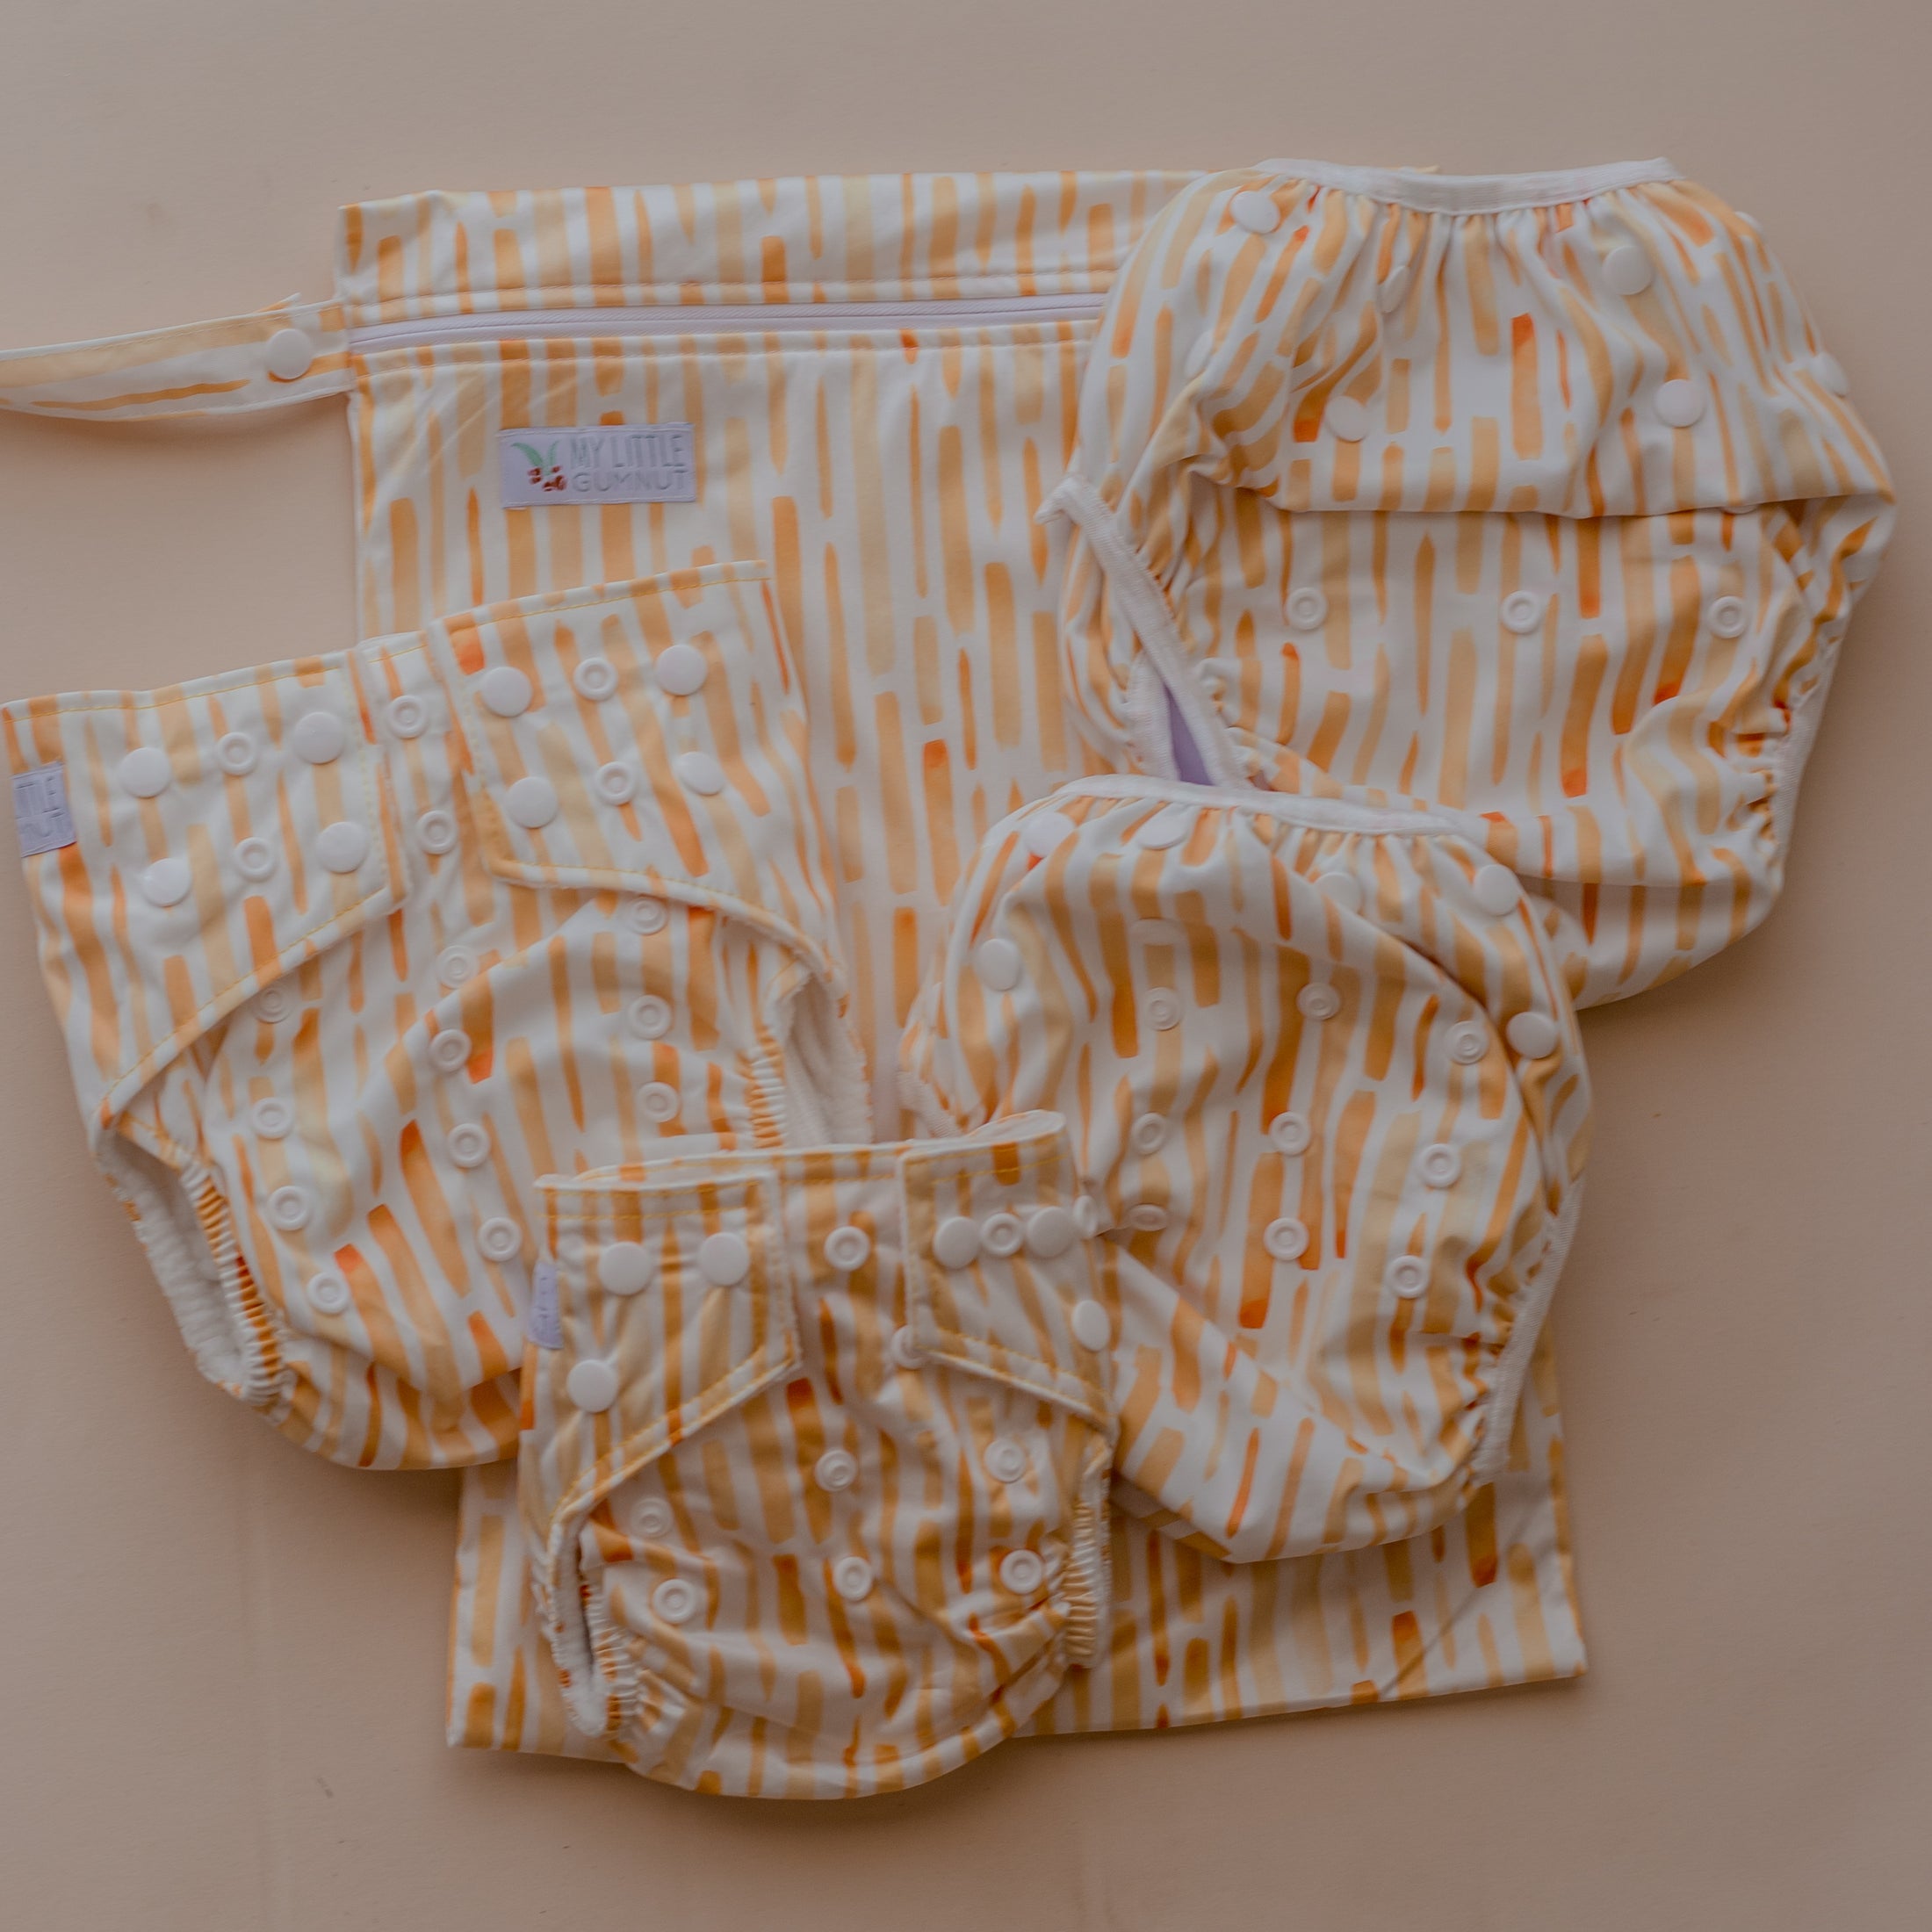 Wet Bag by my little gumnut. australian owned reusable nappies. cloth nappies. toddler nappies. reusable nappy bag.